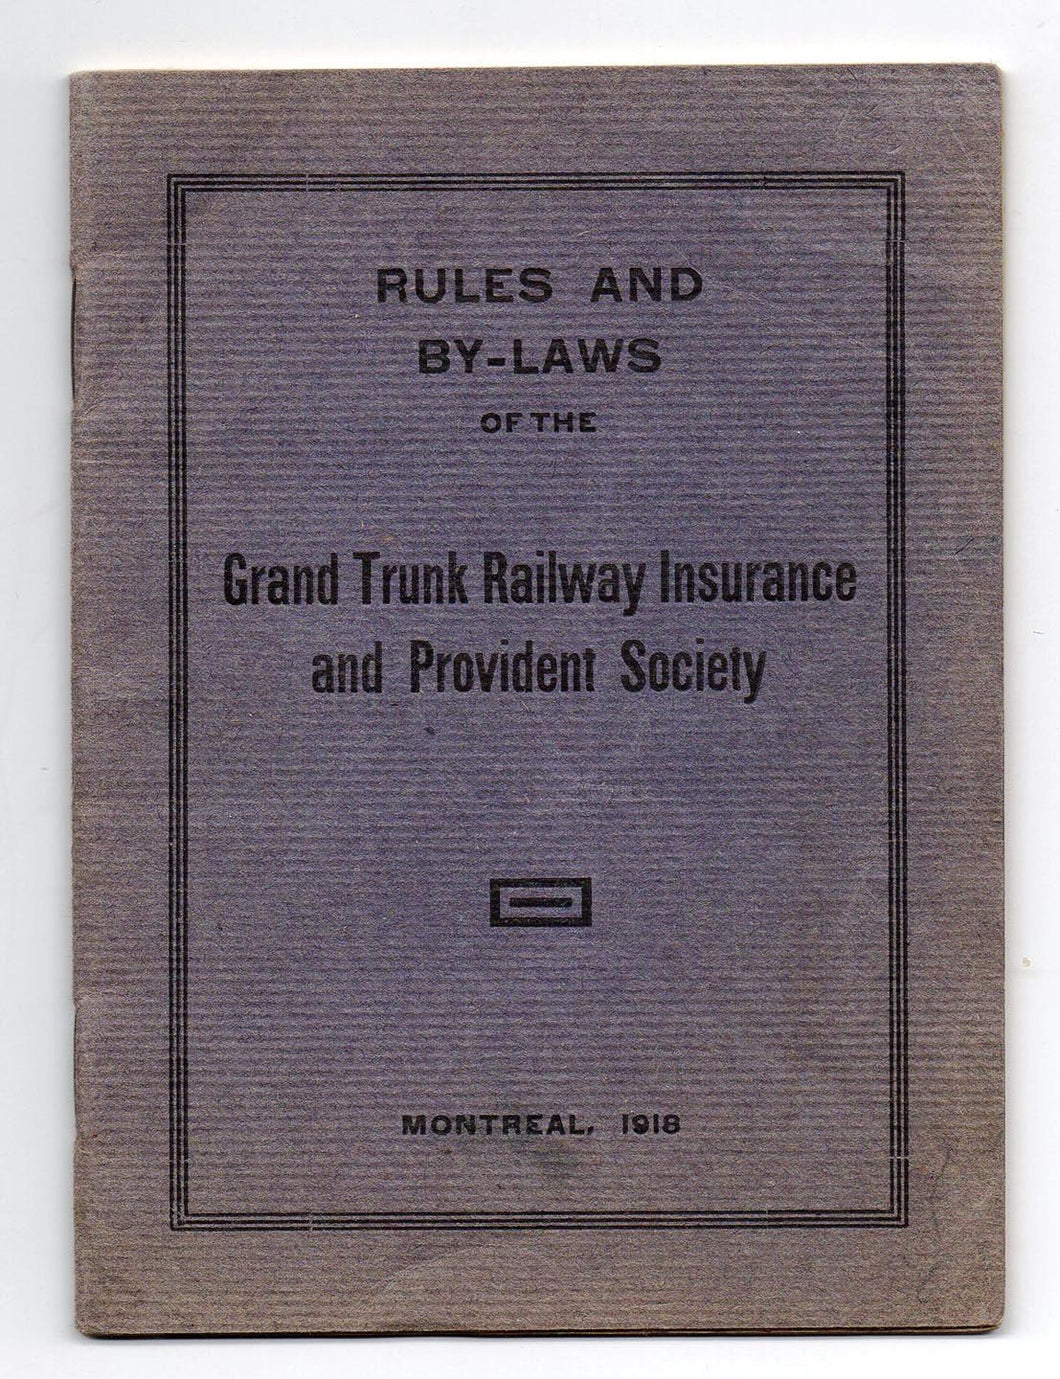 Rules and By-Laws of the Grand Trunk Railway Insurance and Provident Society